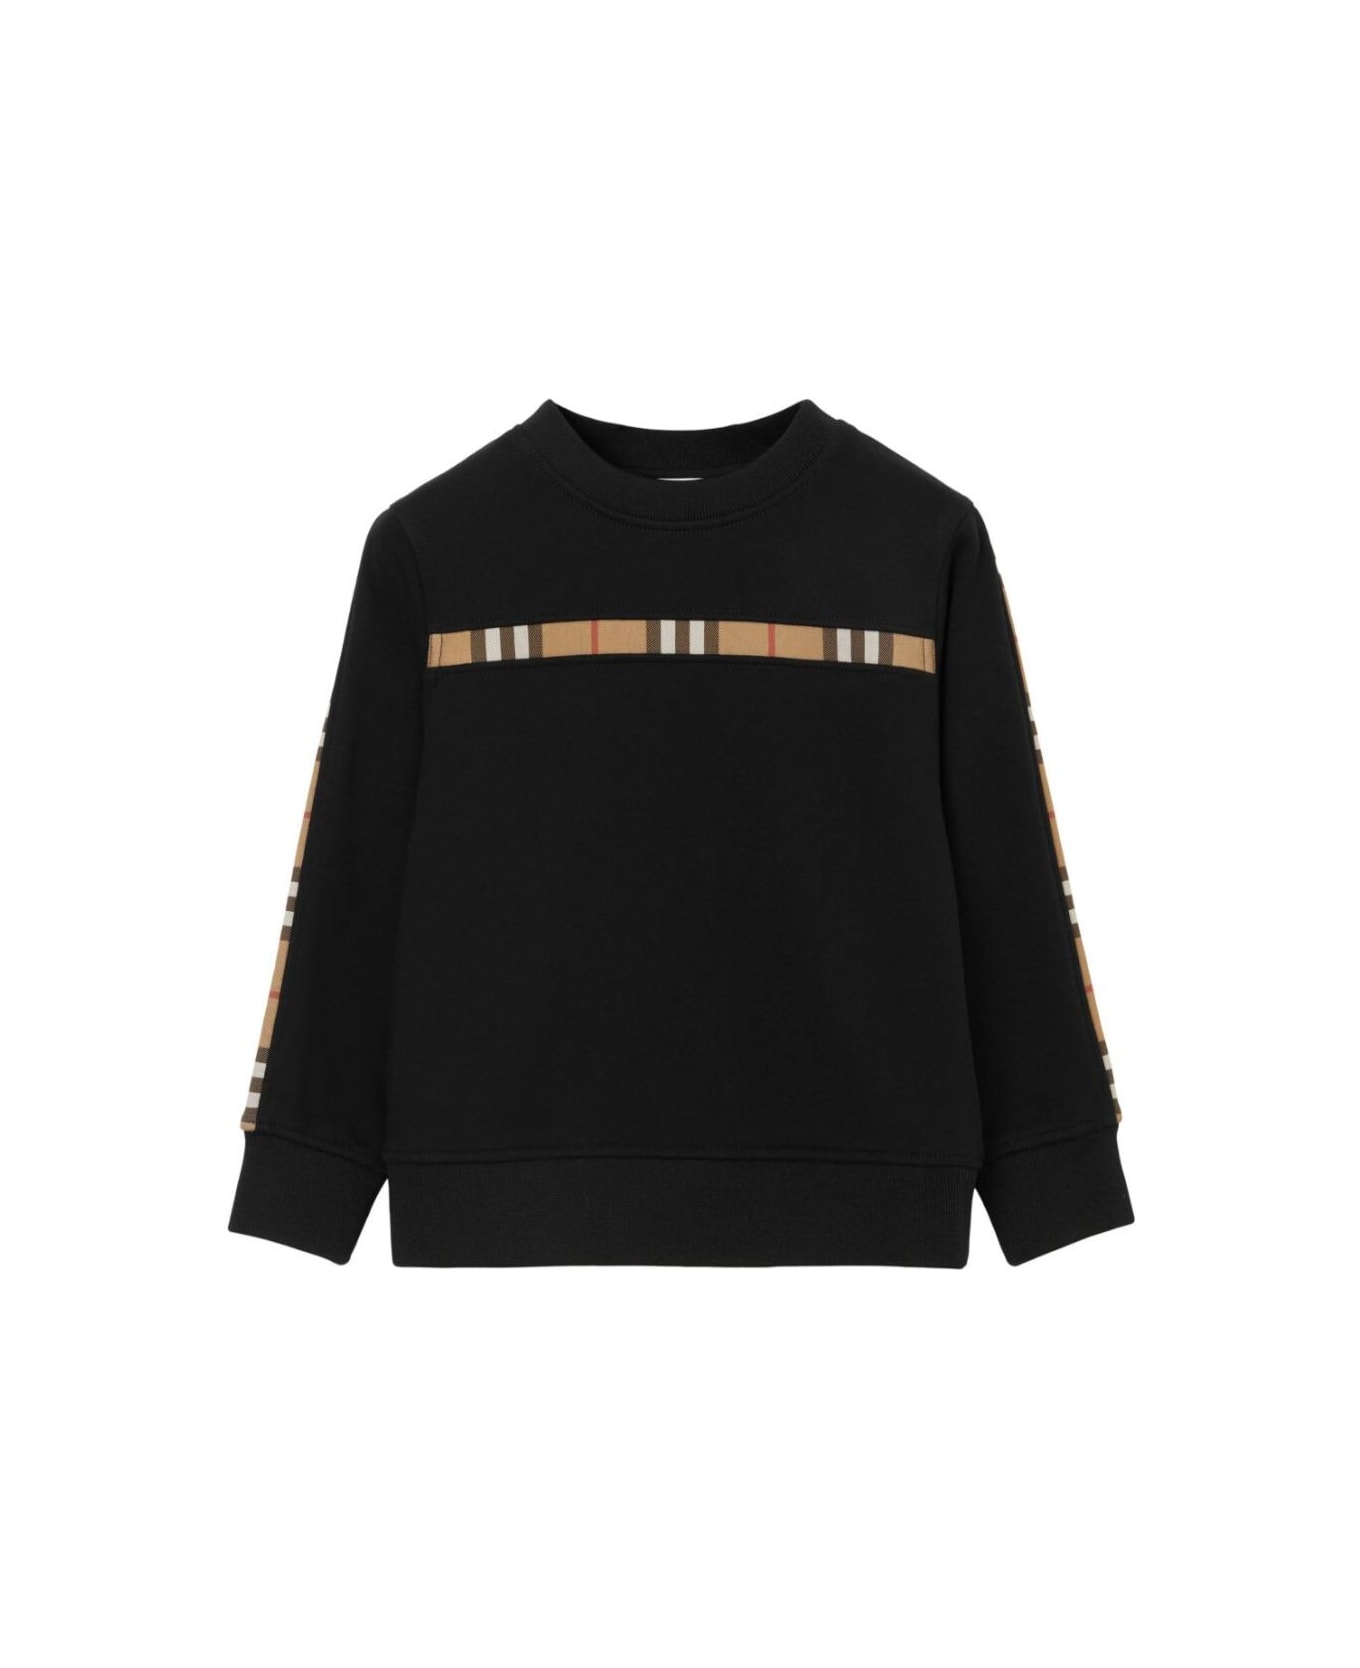 Burberry Black Crewneck Sweatshirt With Check Print On The Front And On Sleeves In Cotton Boy - Black